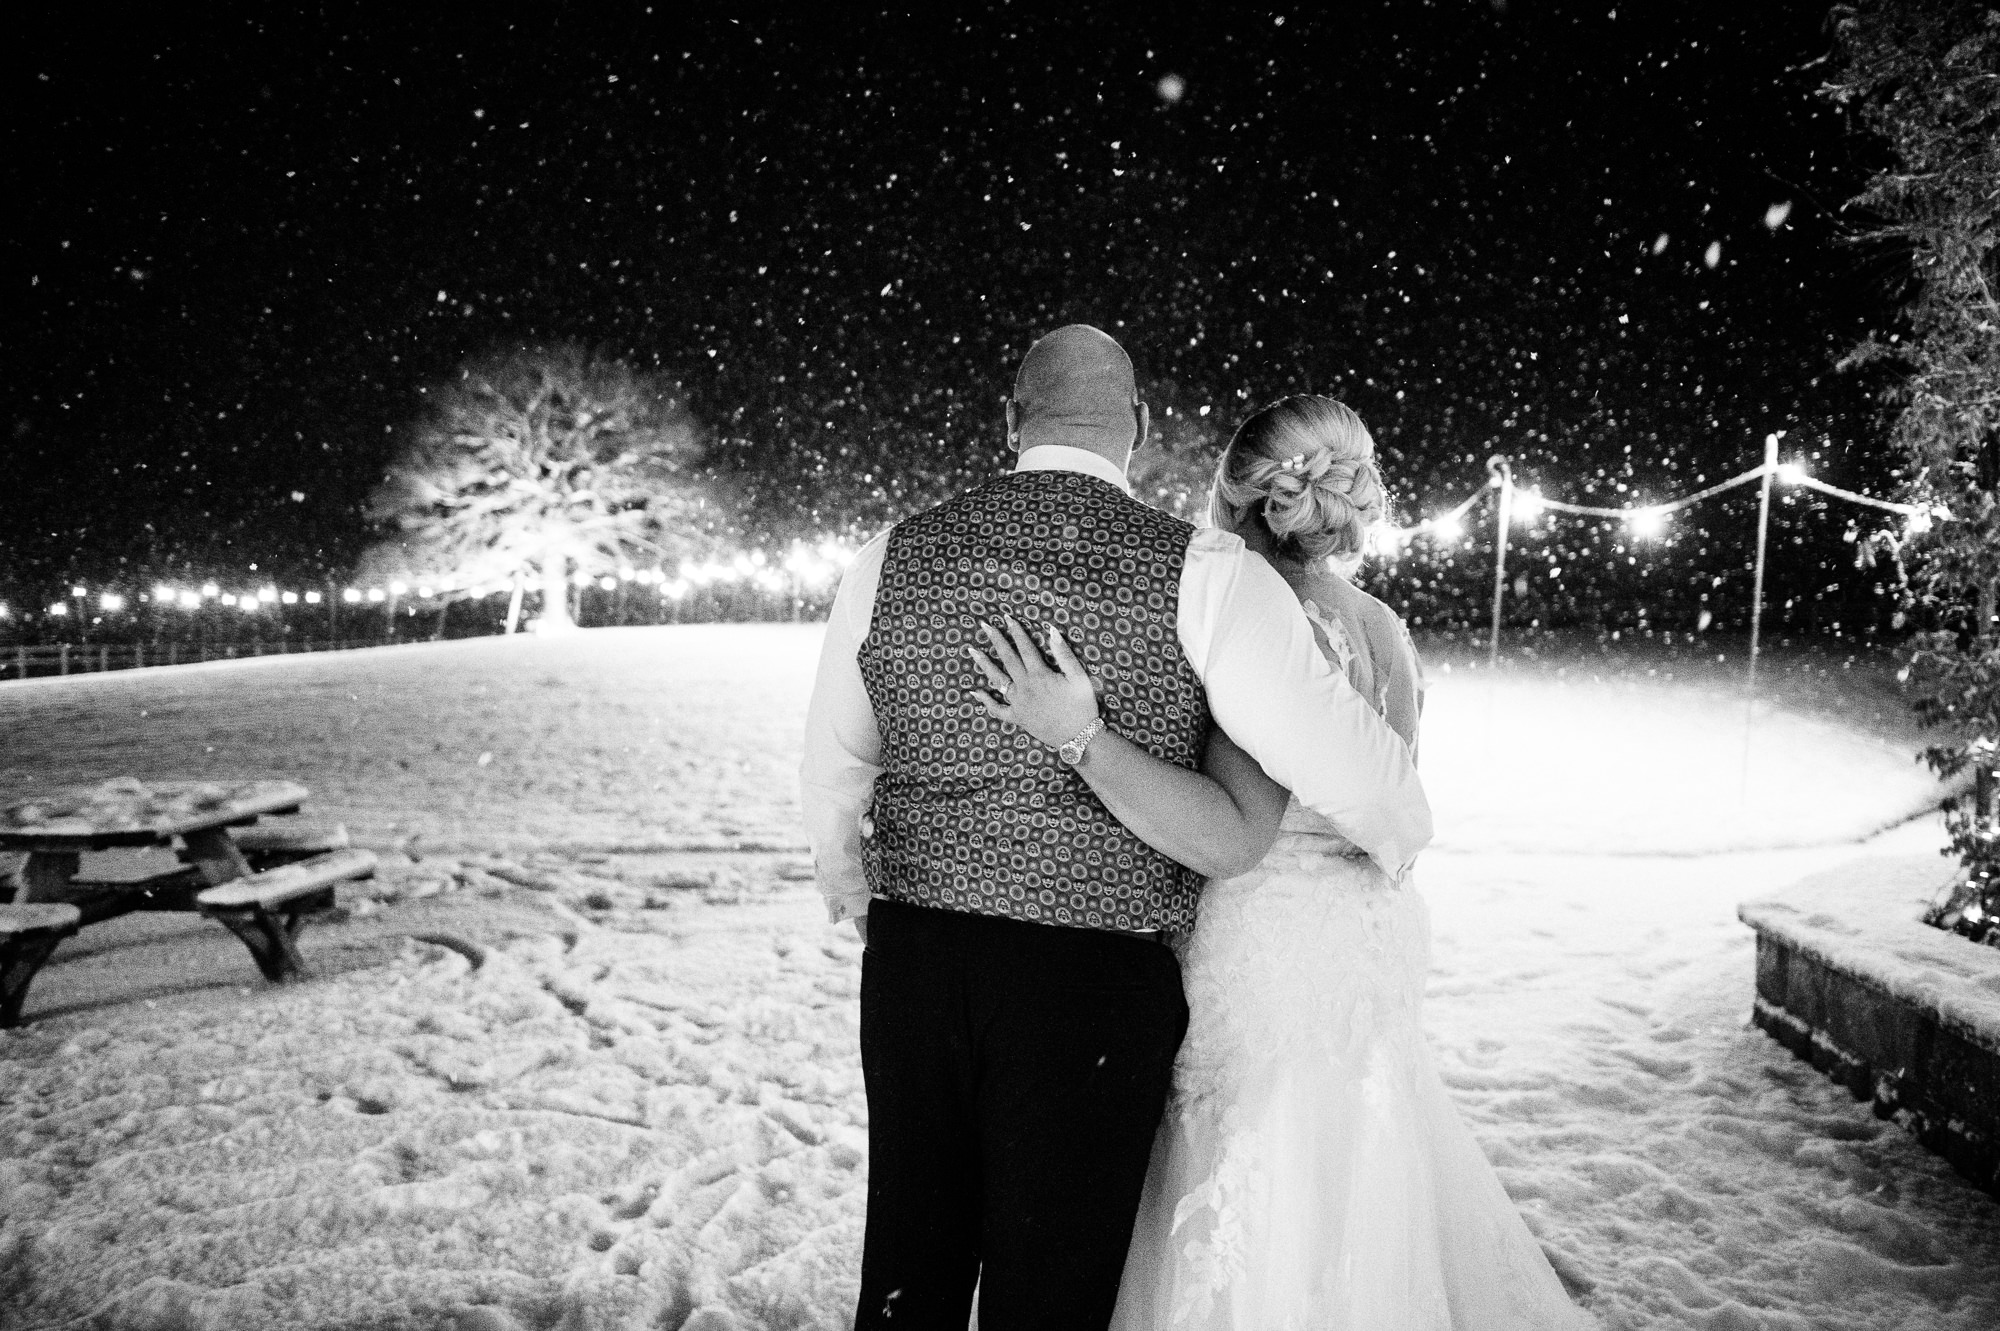 winter wedding couples portrait stood together looking at the snow